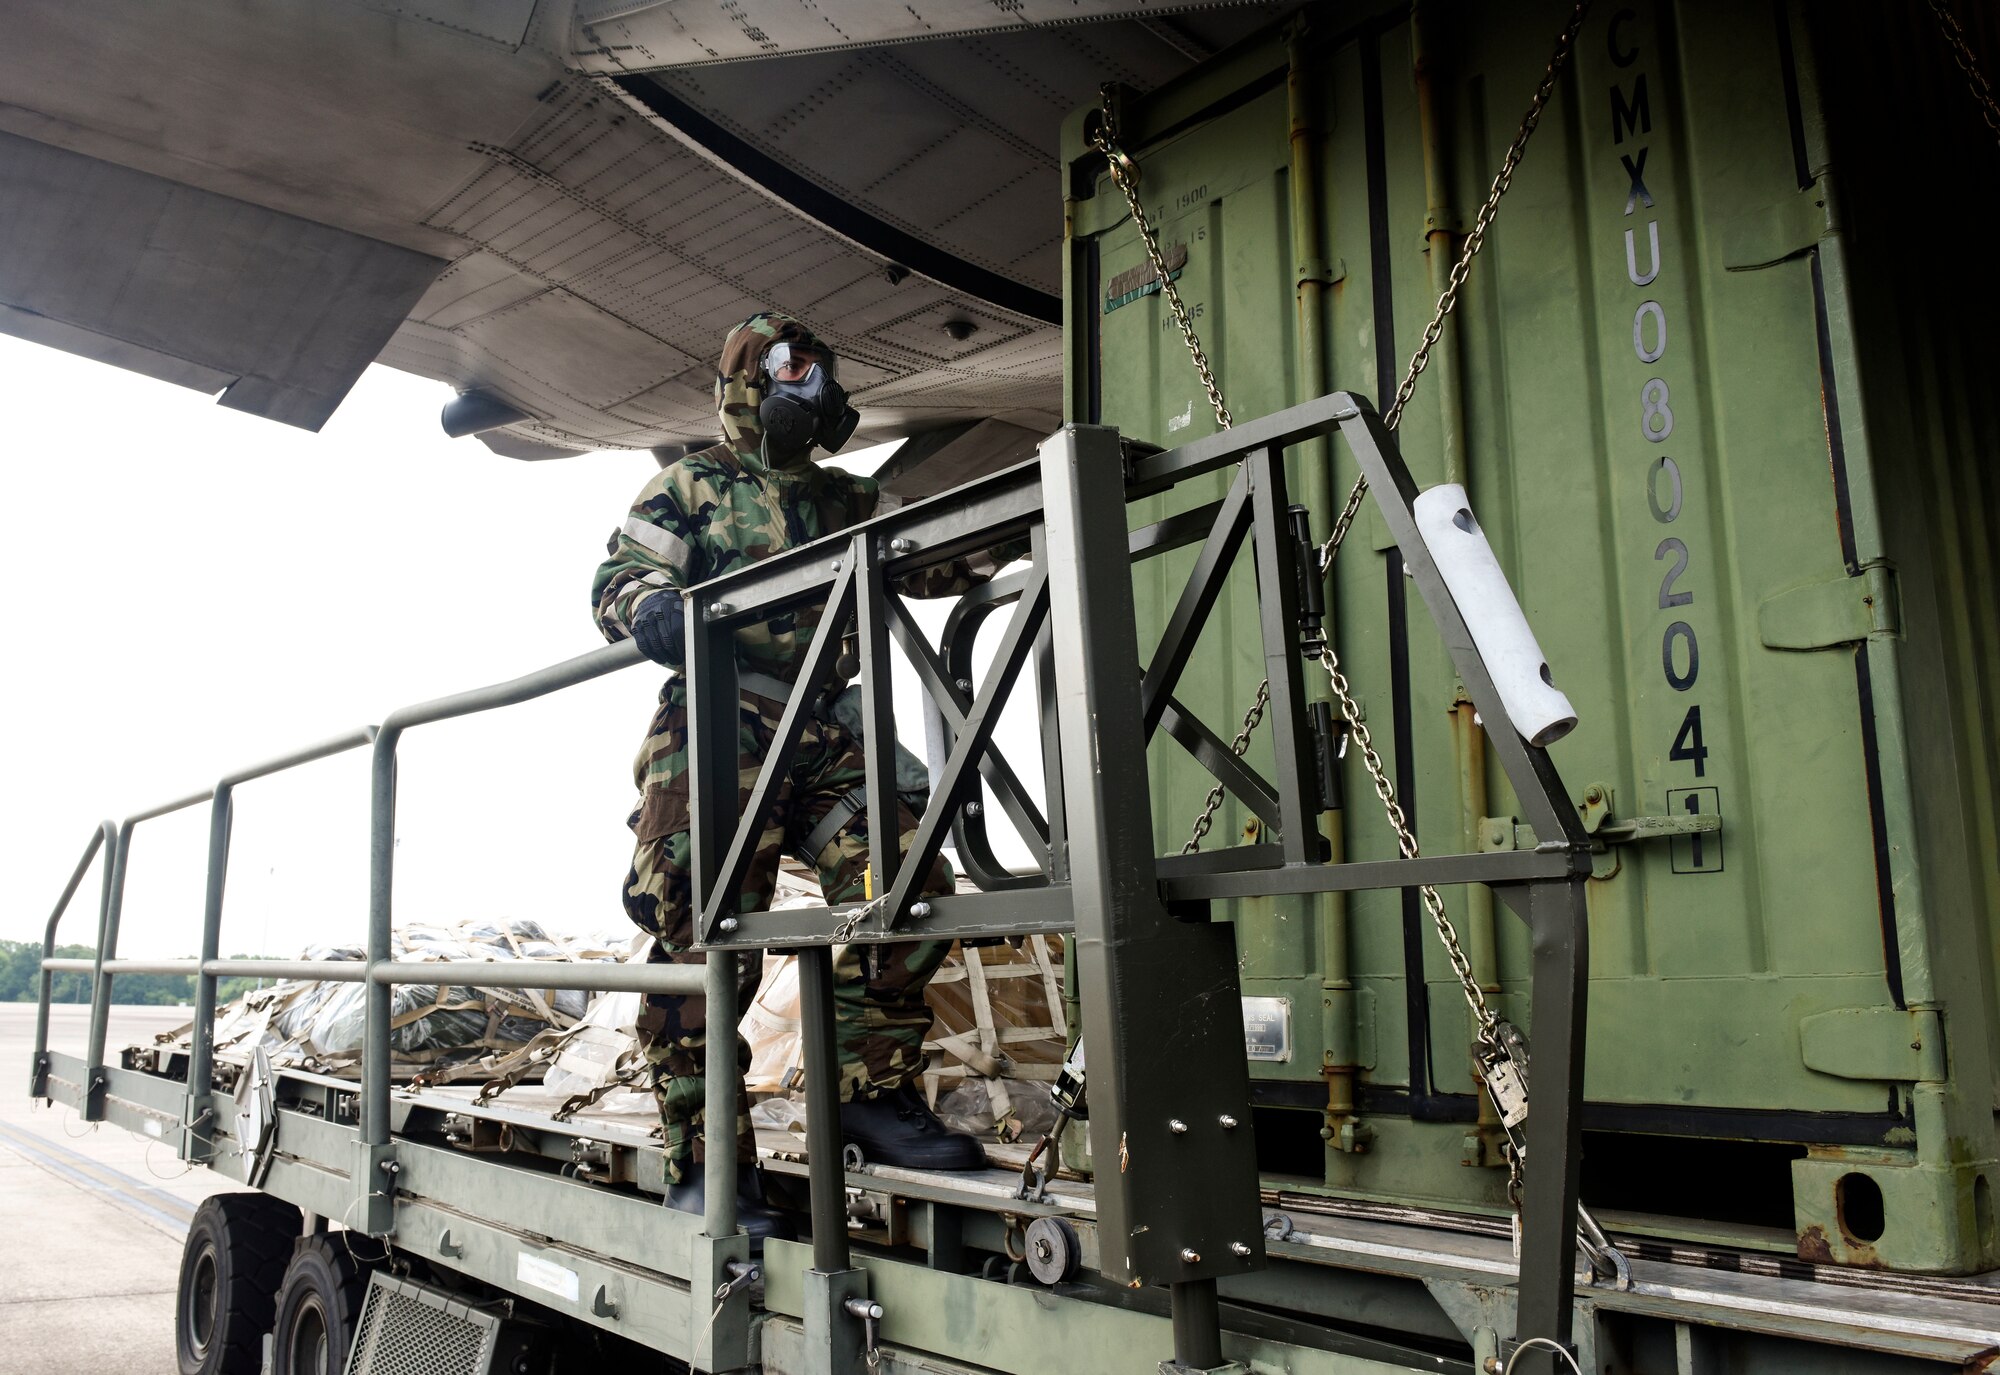 ‘Port Dawgs’ from the 189th Aerial Port Flight, Air National Guard, and from the 96th Aerial Port Squadron, Air Force Reserve, guides the cargo from the K-loader onto the ramp of a C-130H Hercules aircraft on June 5, 2021 at Little Rock Air Force Base, Arkansas. The total force team created training focused on a realistic deployment centered, aerial port operations. (U.S. Air Force photo by Tech. Sgt. James Phillips)